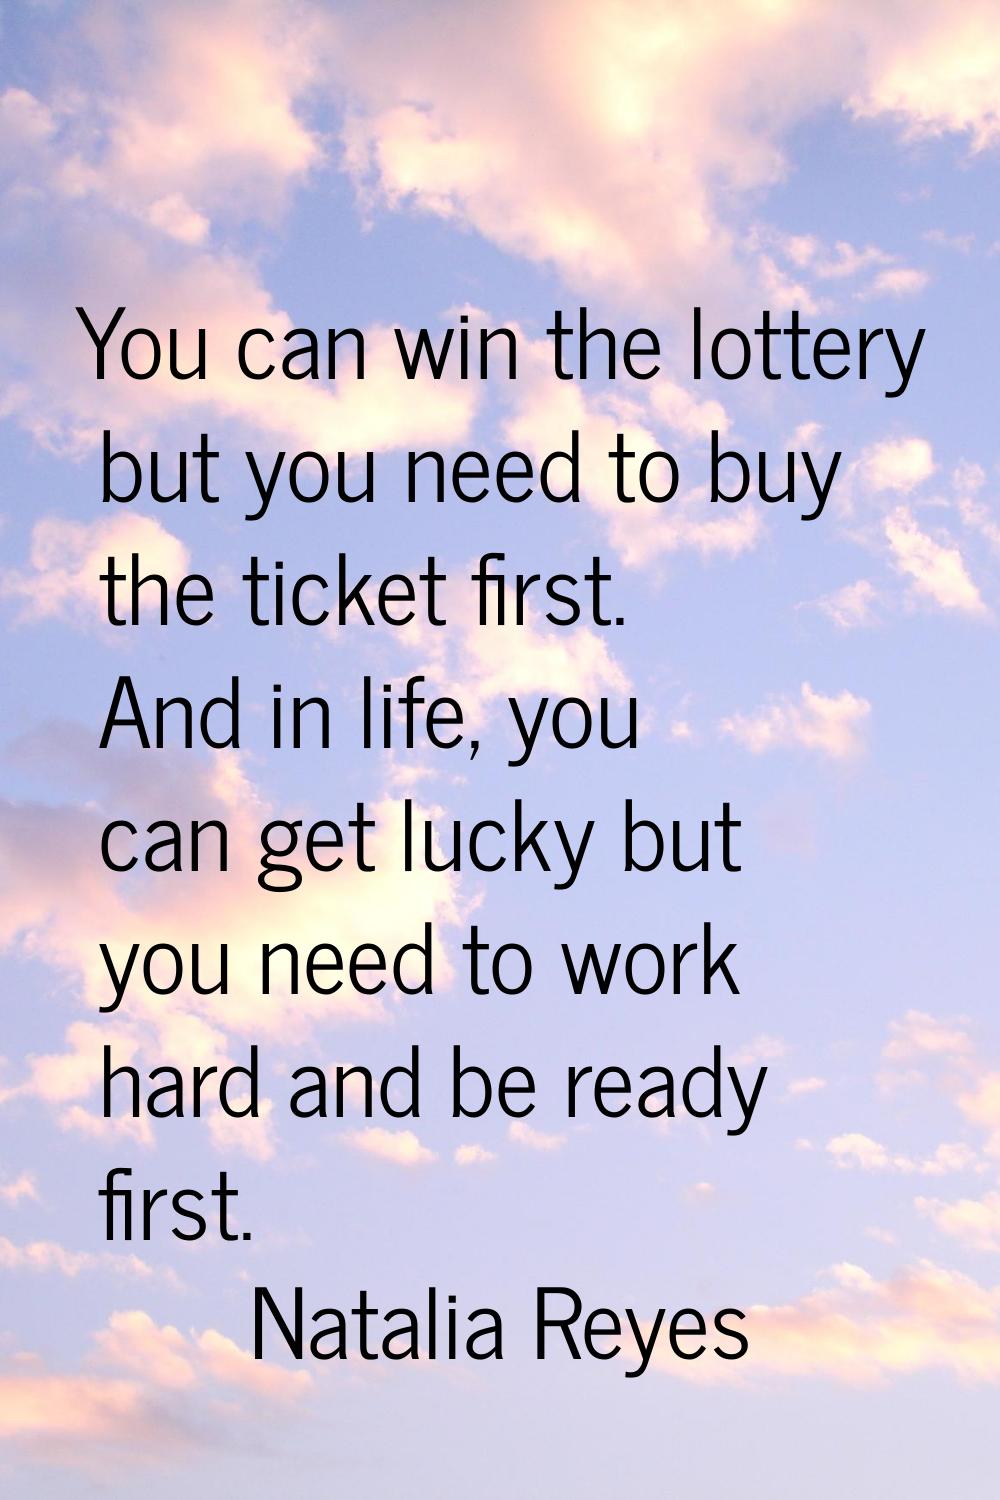 You can win the lottery but you need to buy the ticket first. And in life, you can get lucky but yo